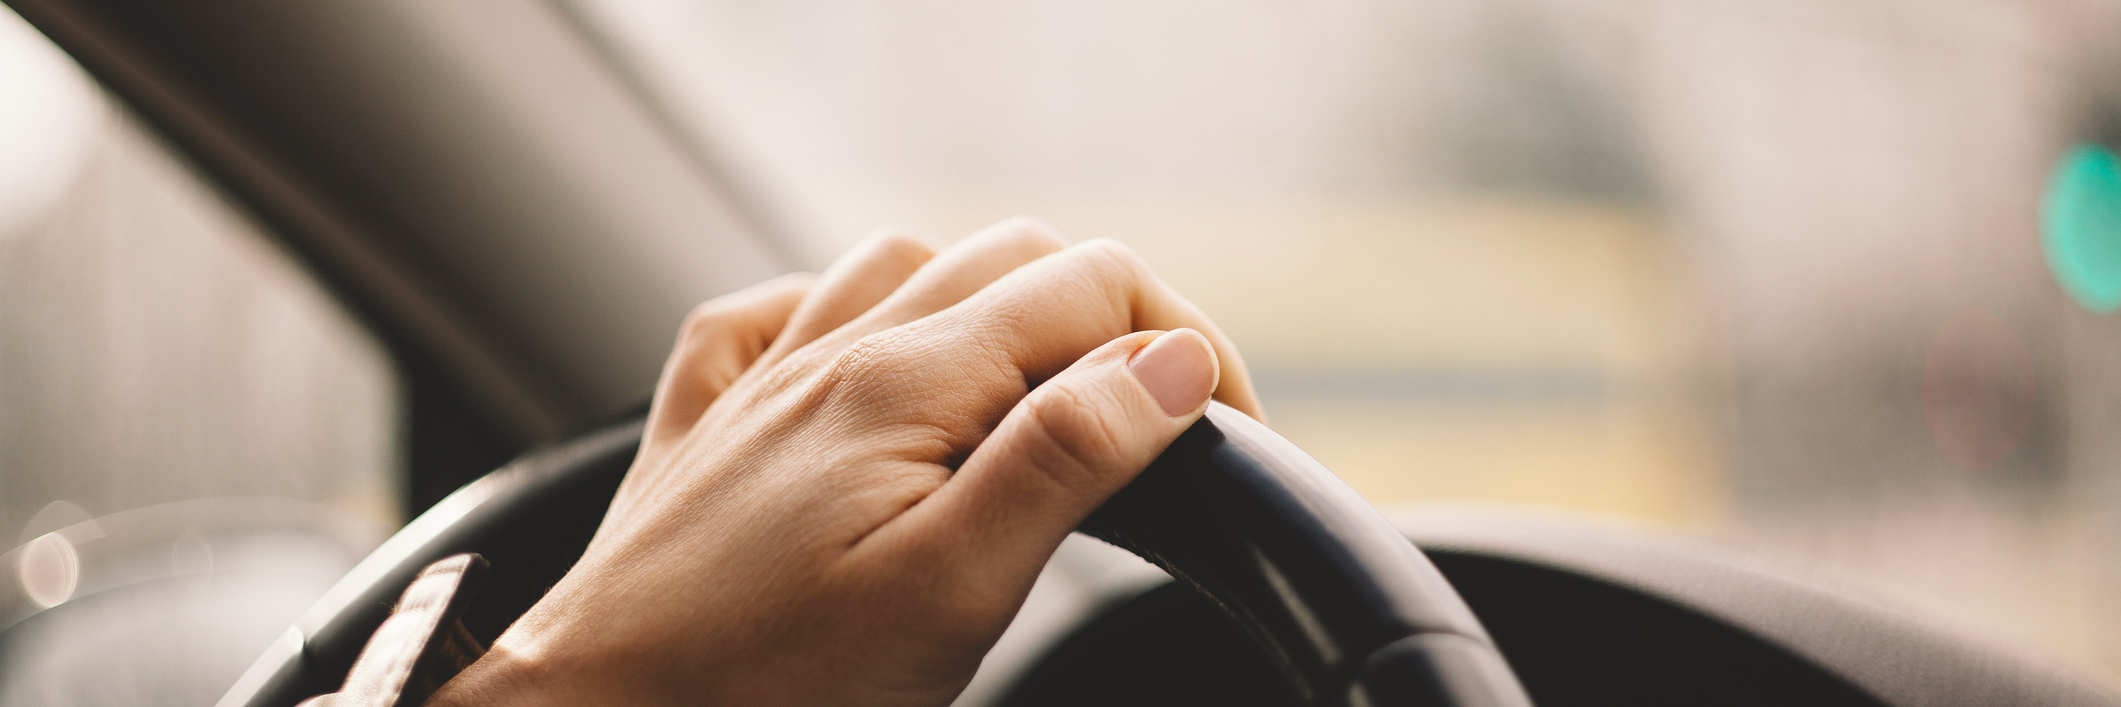 Close-up of a woman's hand driving a car.